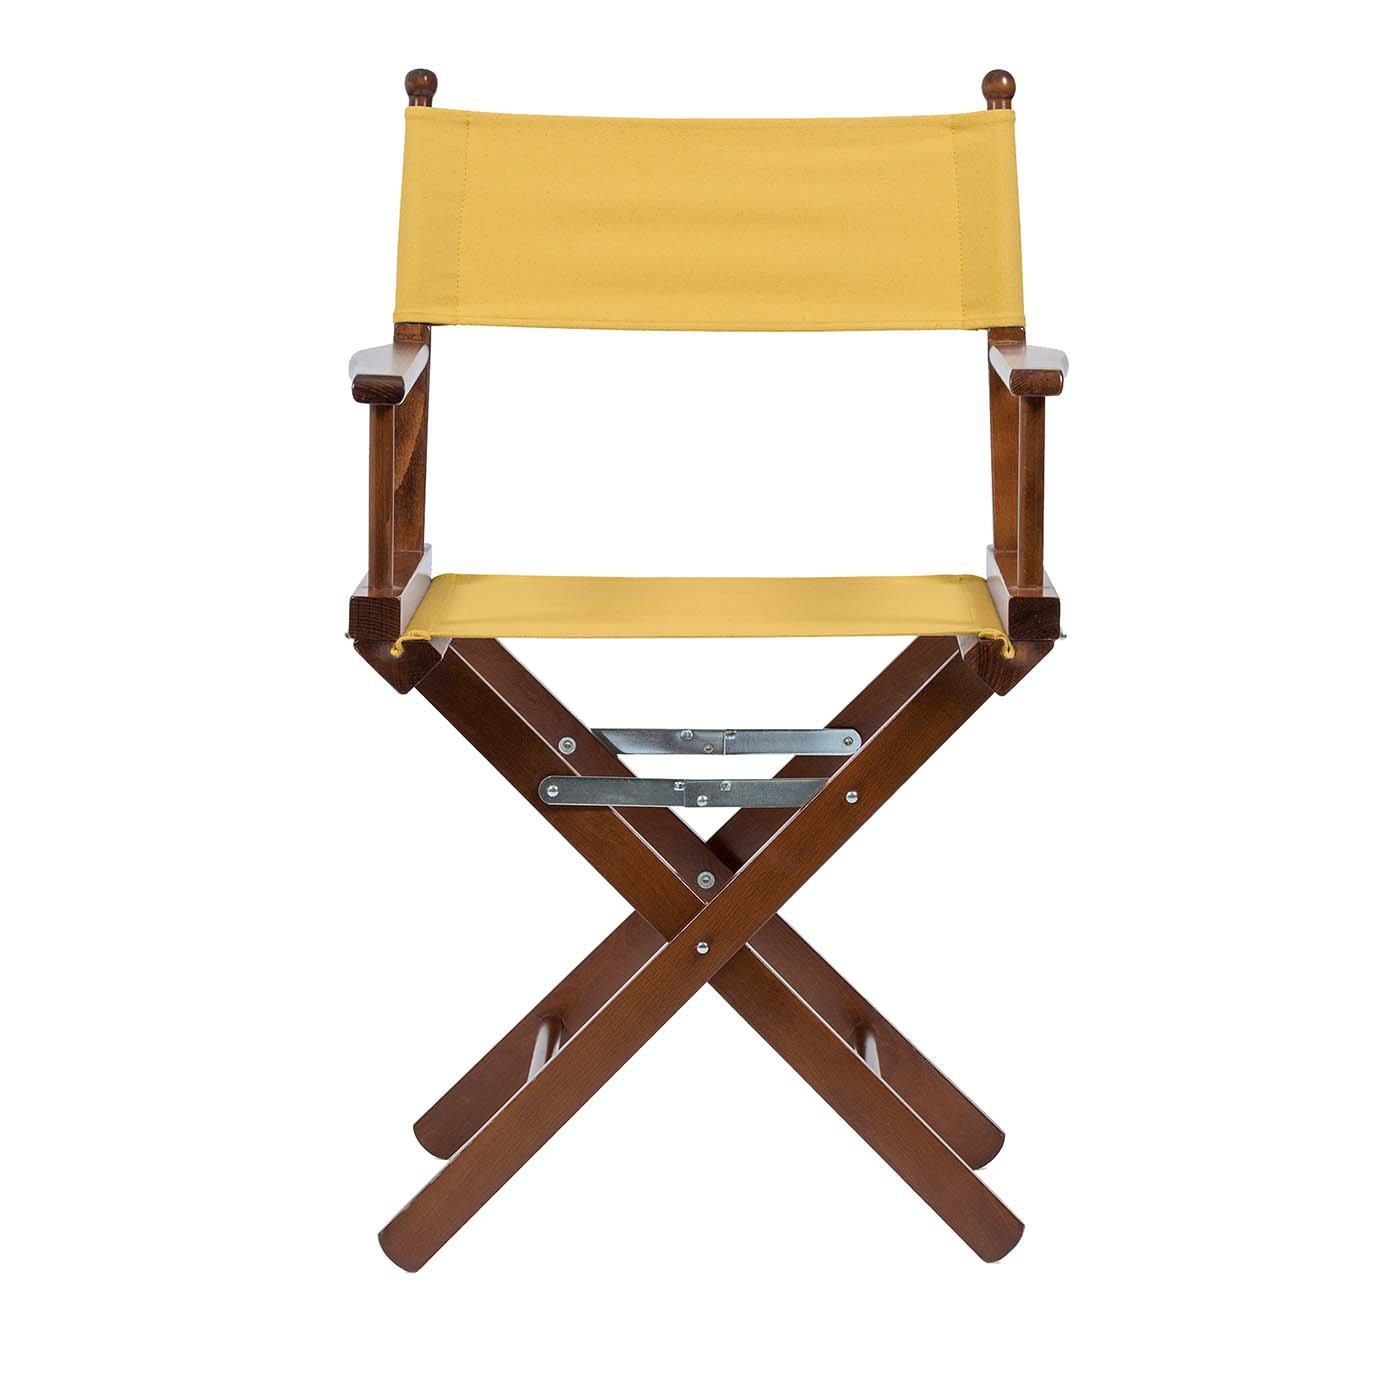 Director's Chair in Mustard Yellow - Main view